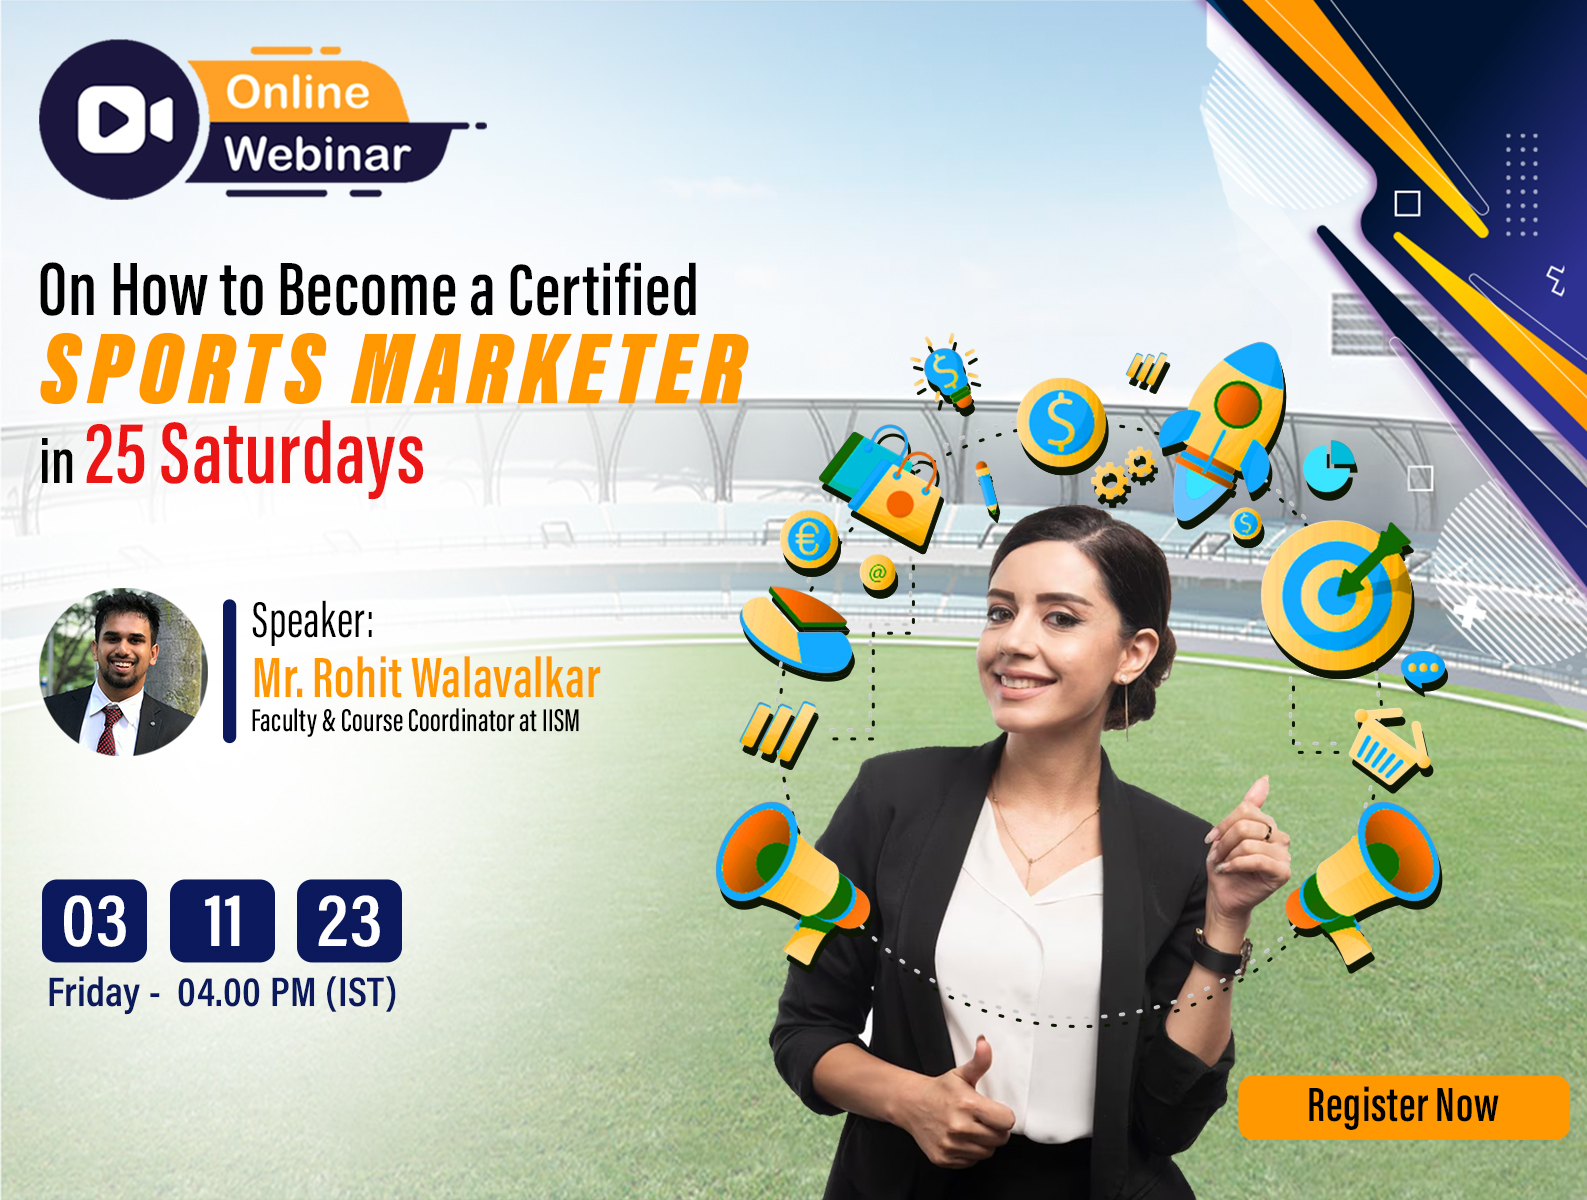 How to Become a Certified Sports Marketer in 25 Saturdays?, Online Event